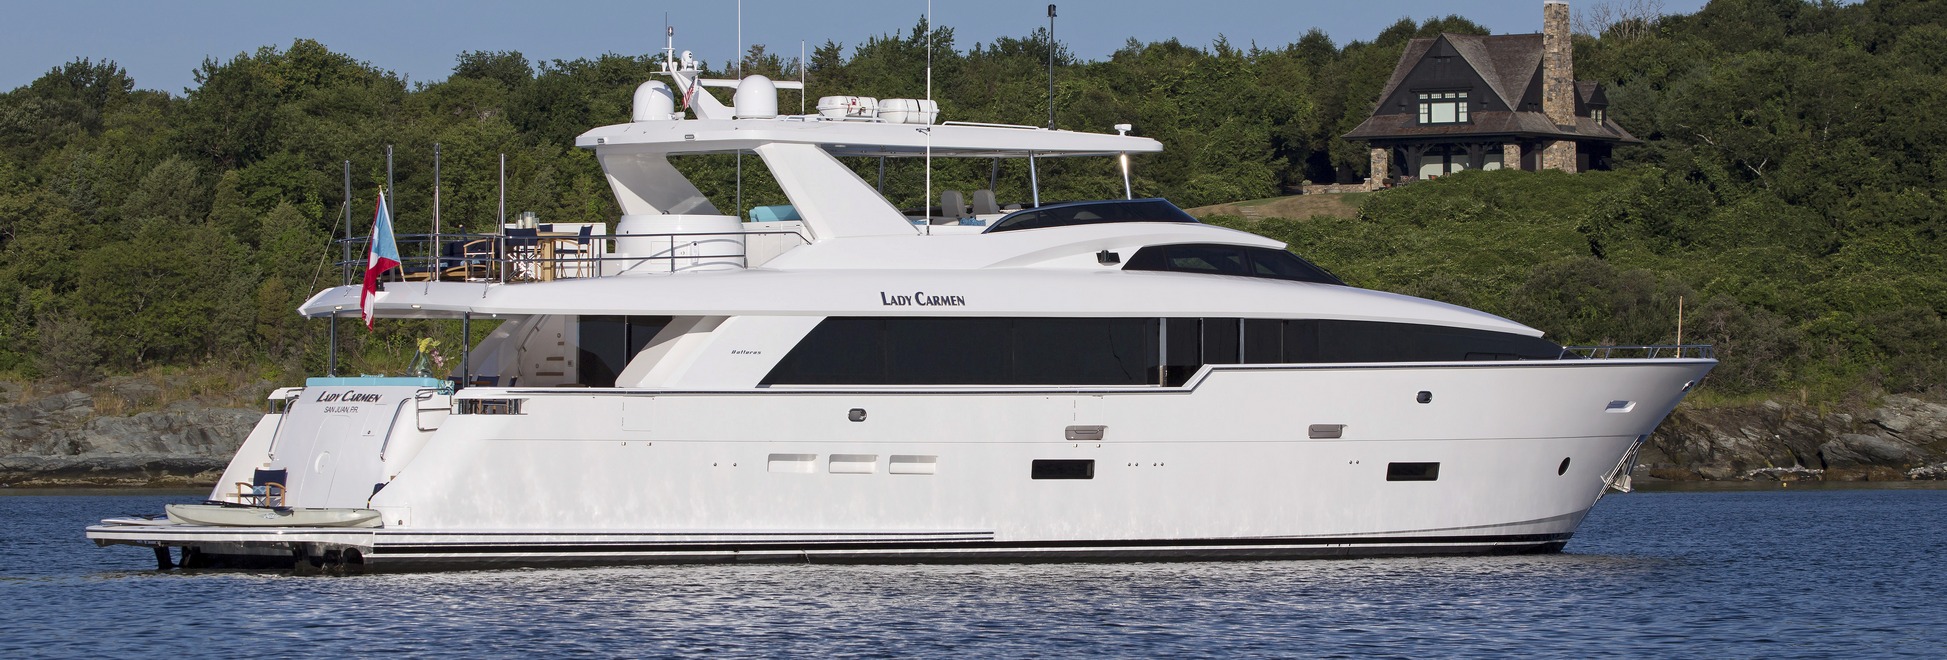 Lady Carmen Motor Yacht Charter In The Caribbean Luxury Charter Group